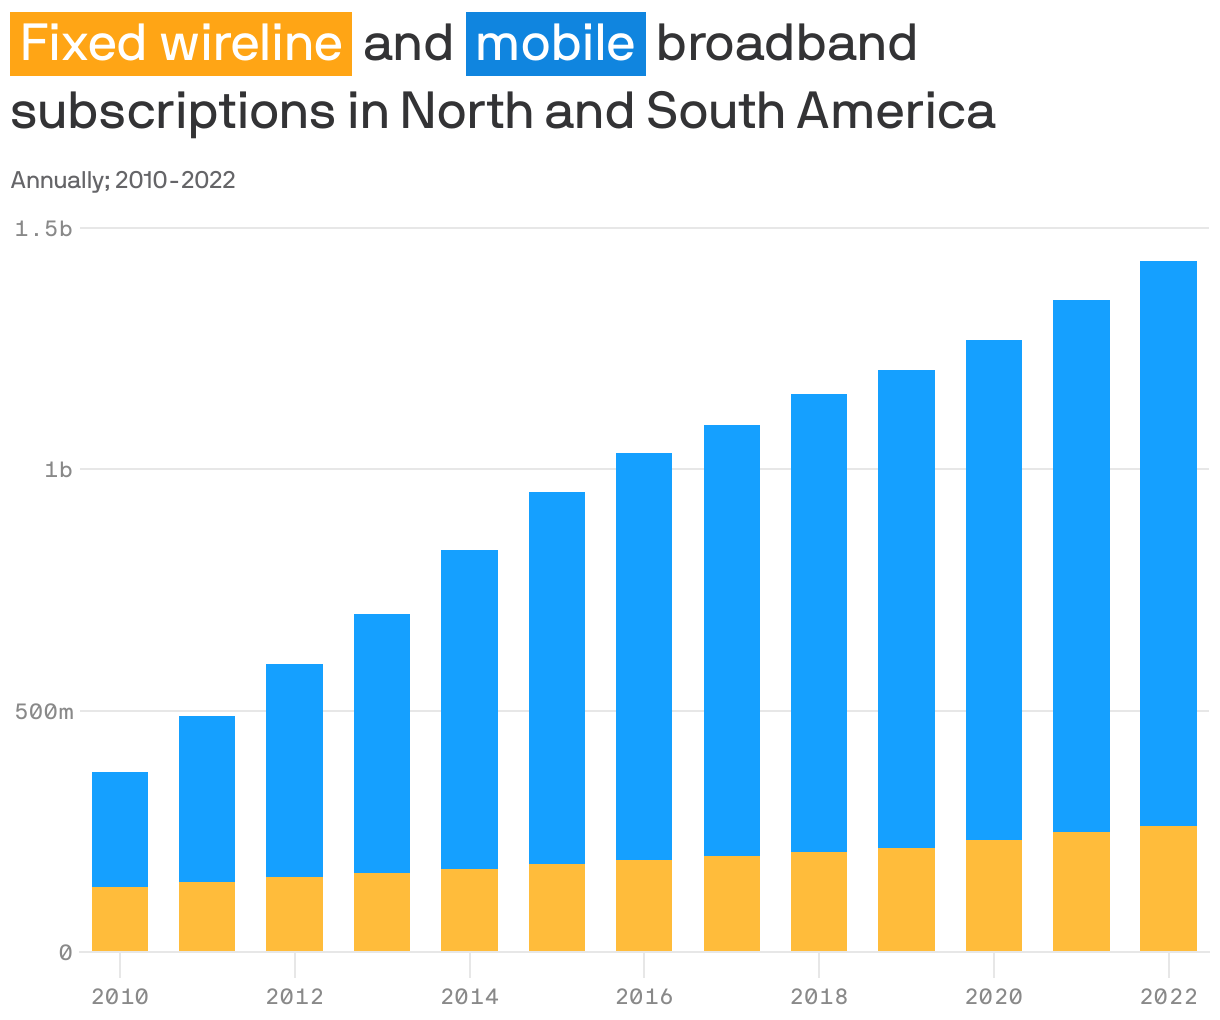 <span style="background:#ffa515; padding:3px 5px;color:white;">Fixed wireline</span> and <span style="background:#1085df; padding:3px 5px;color:white;">mobile</span> broadband subscriptions in North and South America